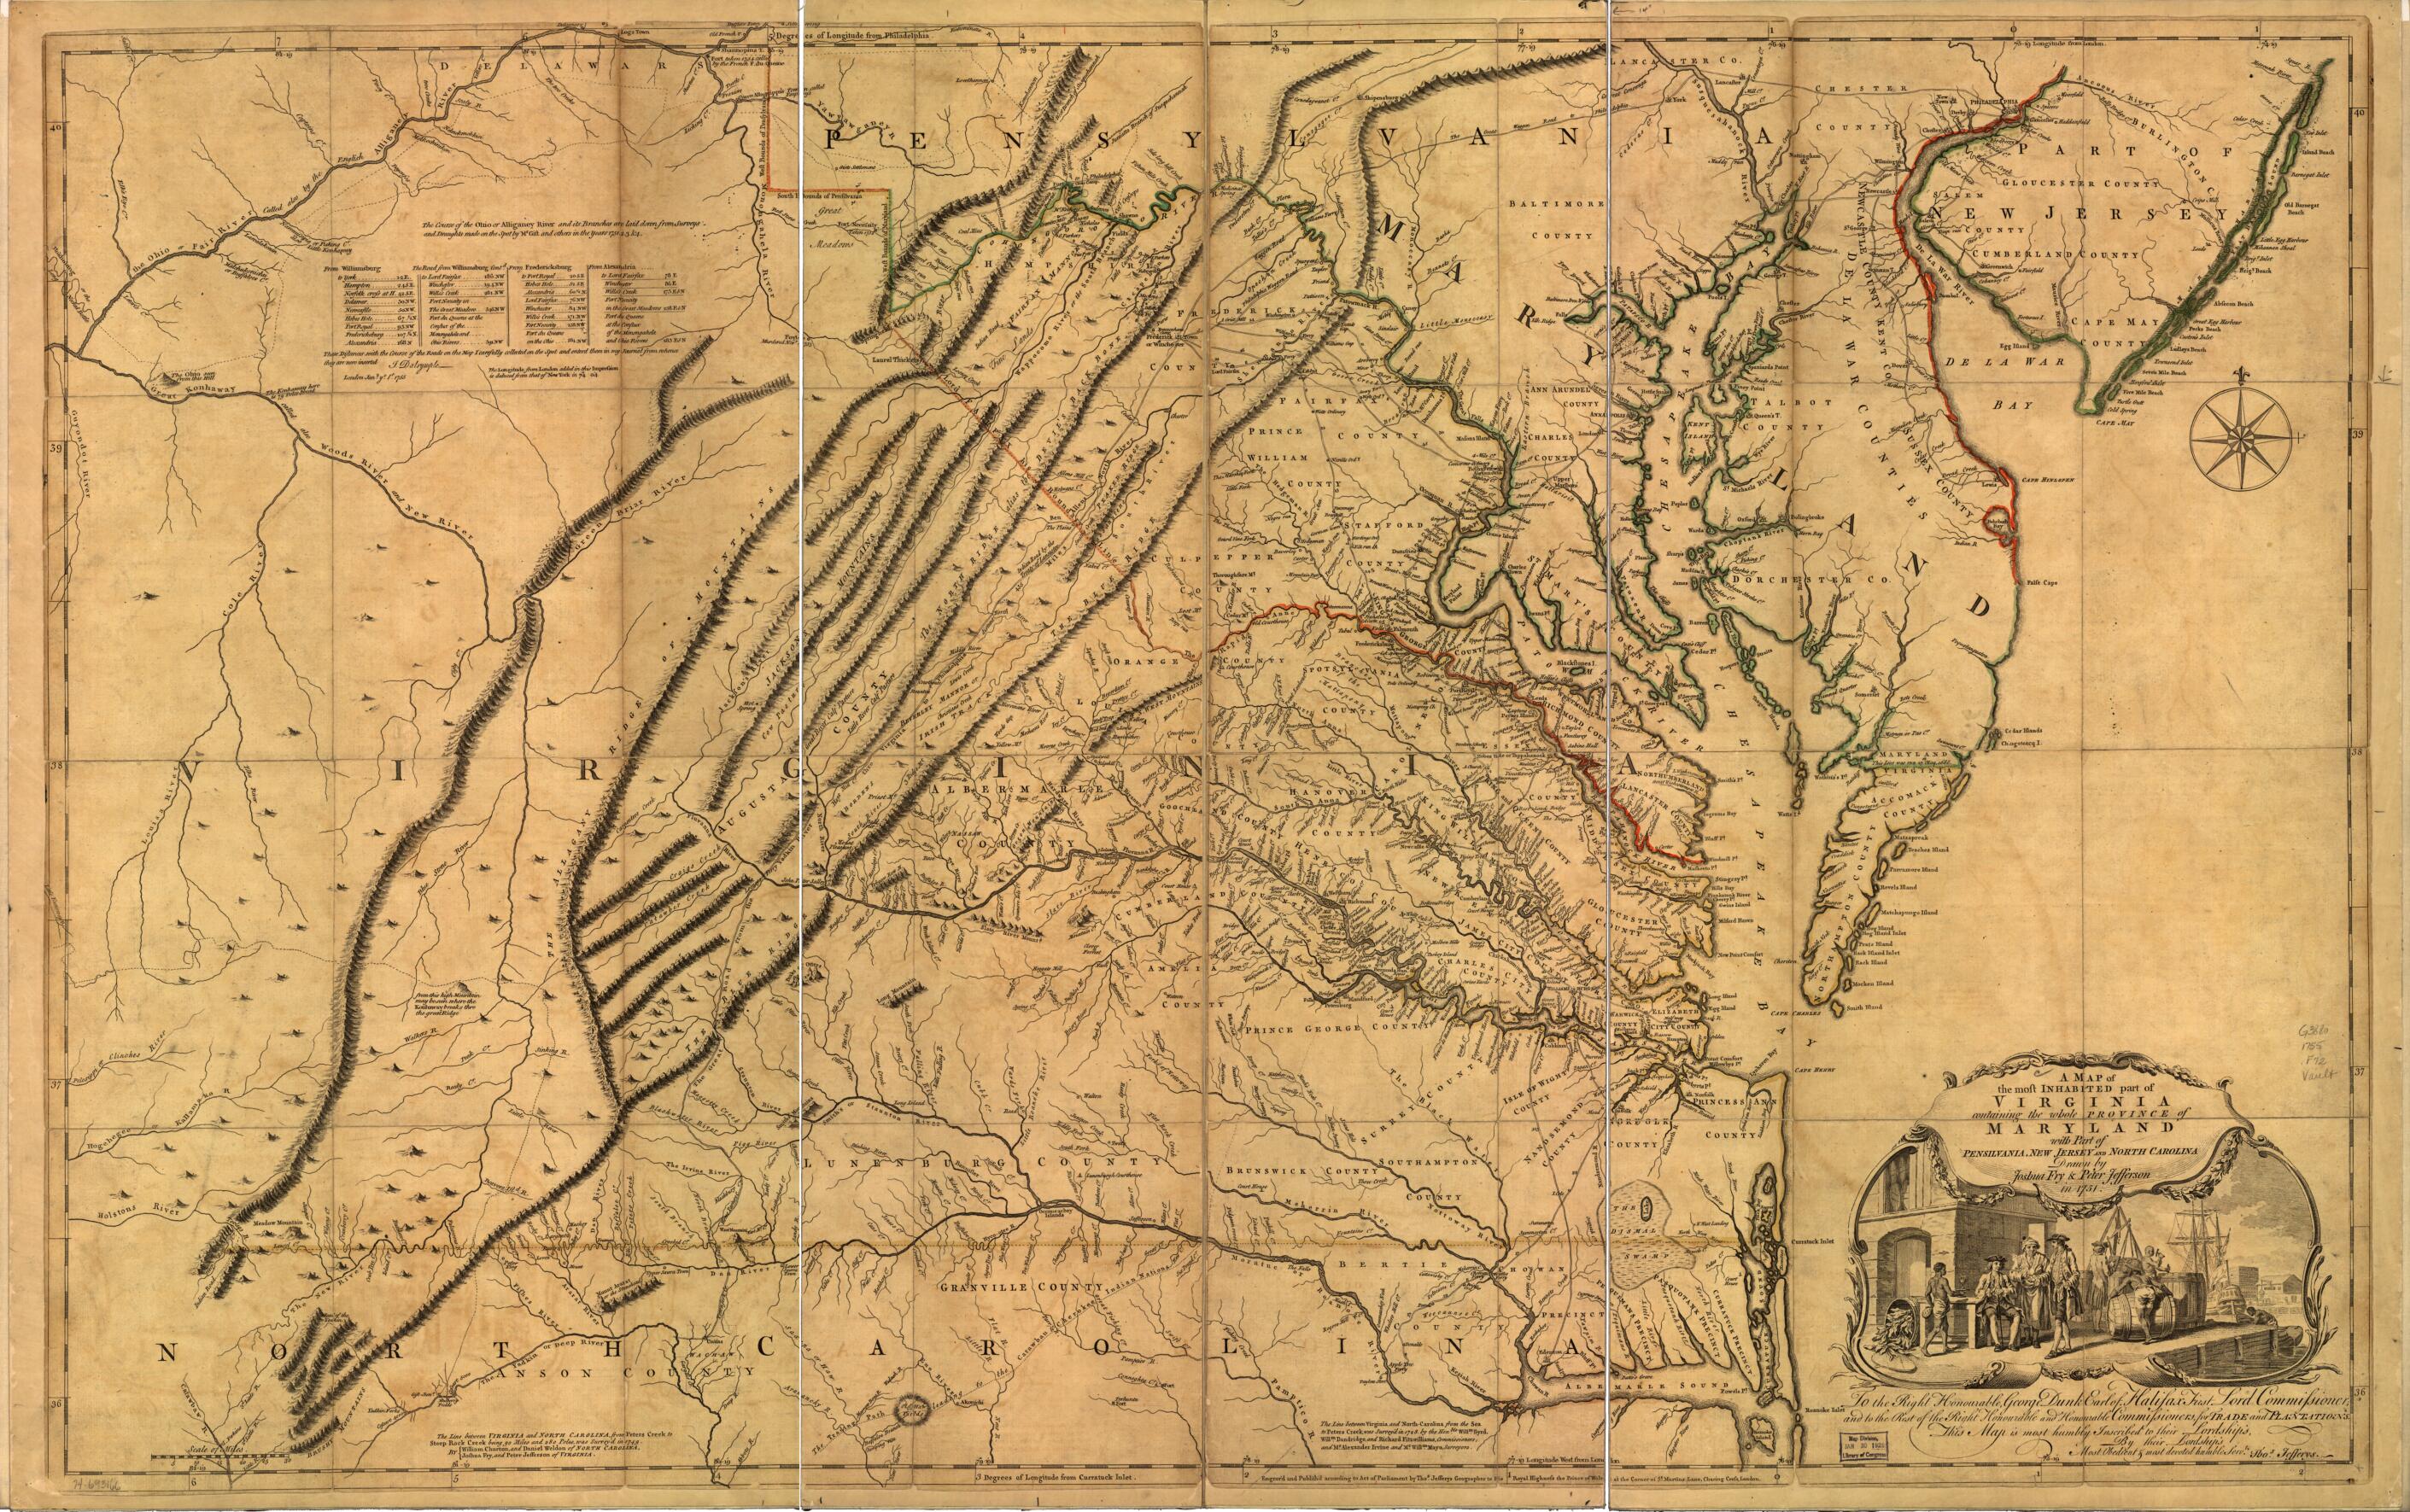 This old map of A Map of the Most Inhabited Part of Virginia Containing the Whole Province of Maryland With Part of Pensilvania, New Jersey and North Carolina from 1755 was created by Joshua Fry, Peter Jefferson, Thomas Jefferys in 1755